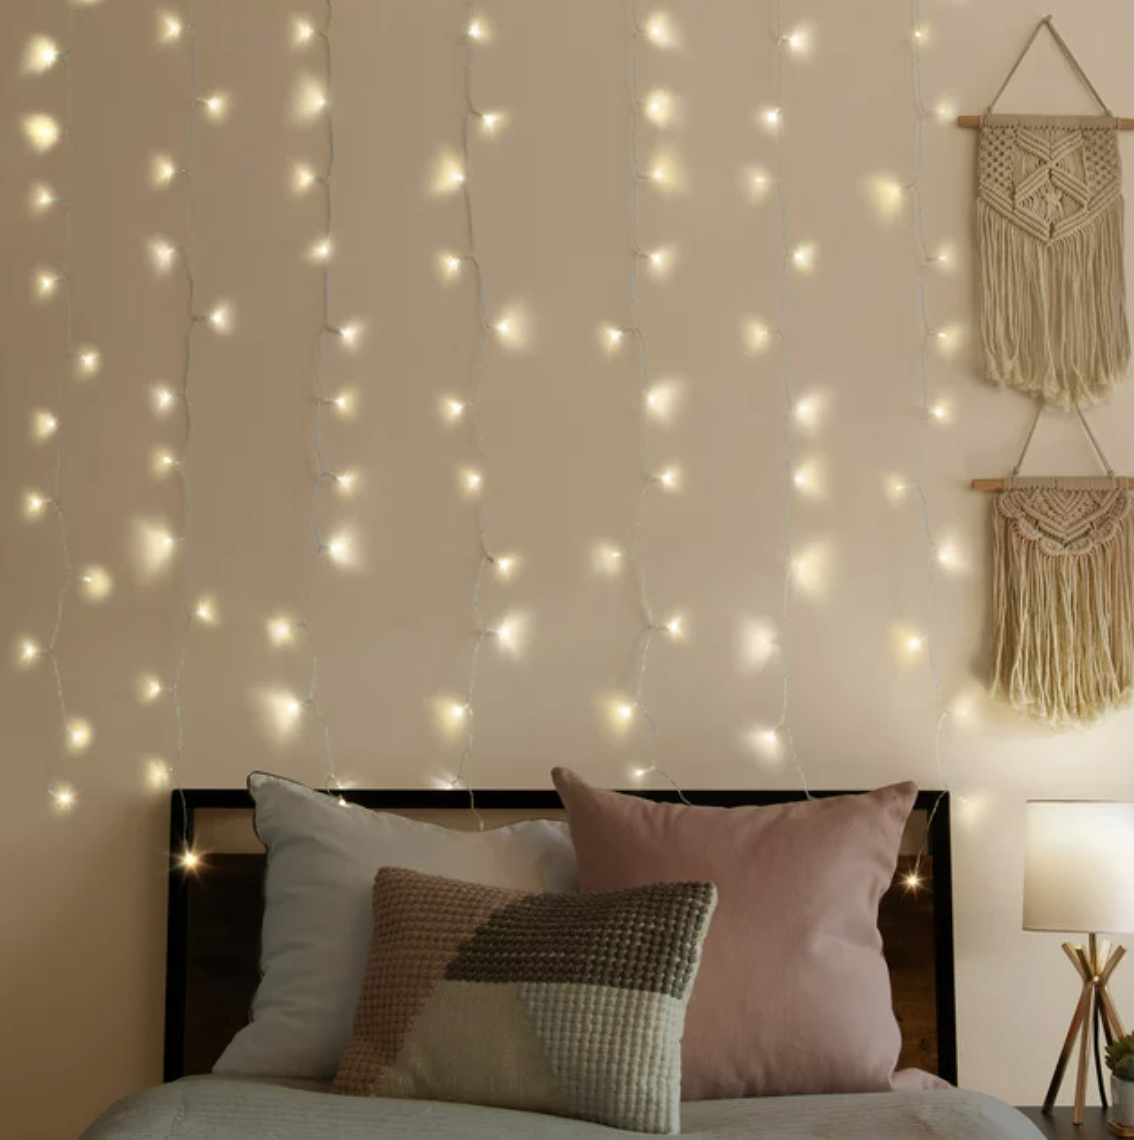 String lights hung on a wall above a bed with decorative pillows